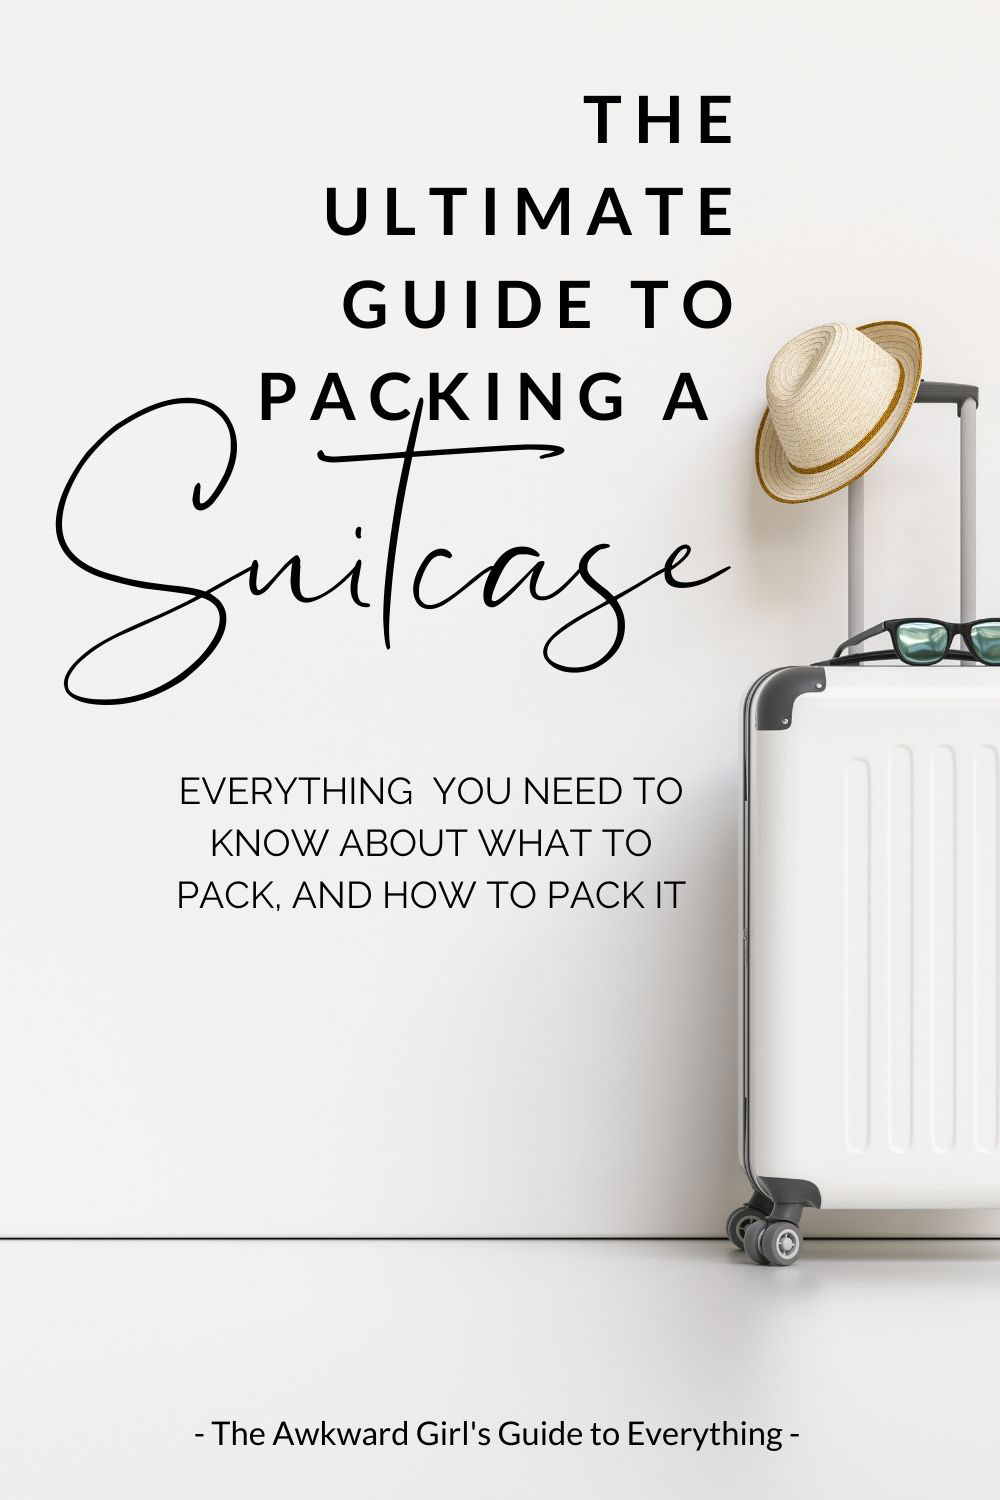 The Ultimate Guide to Packing a Suitcase